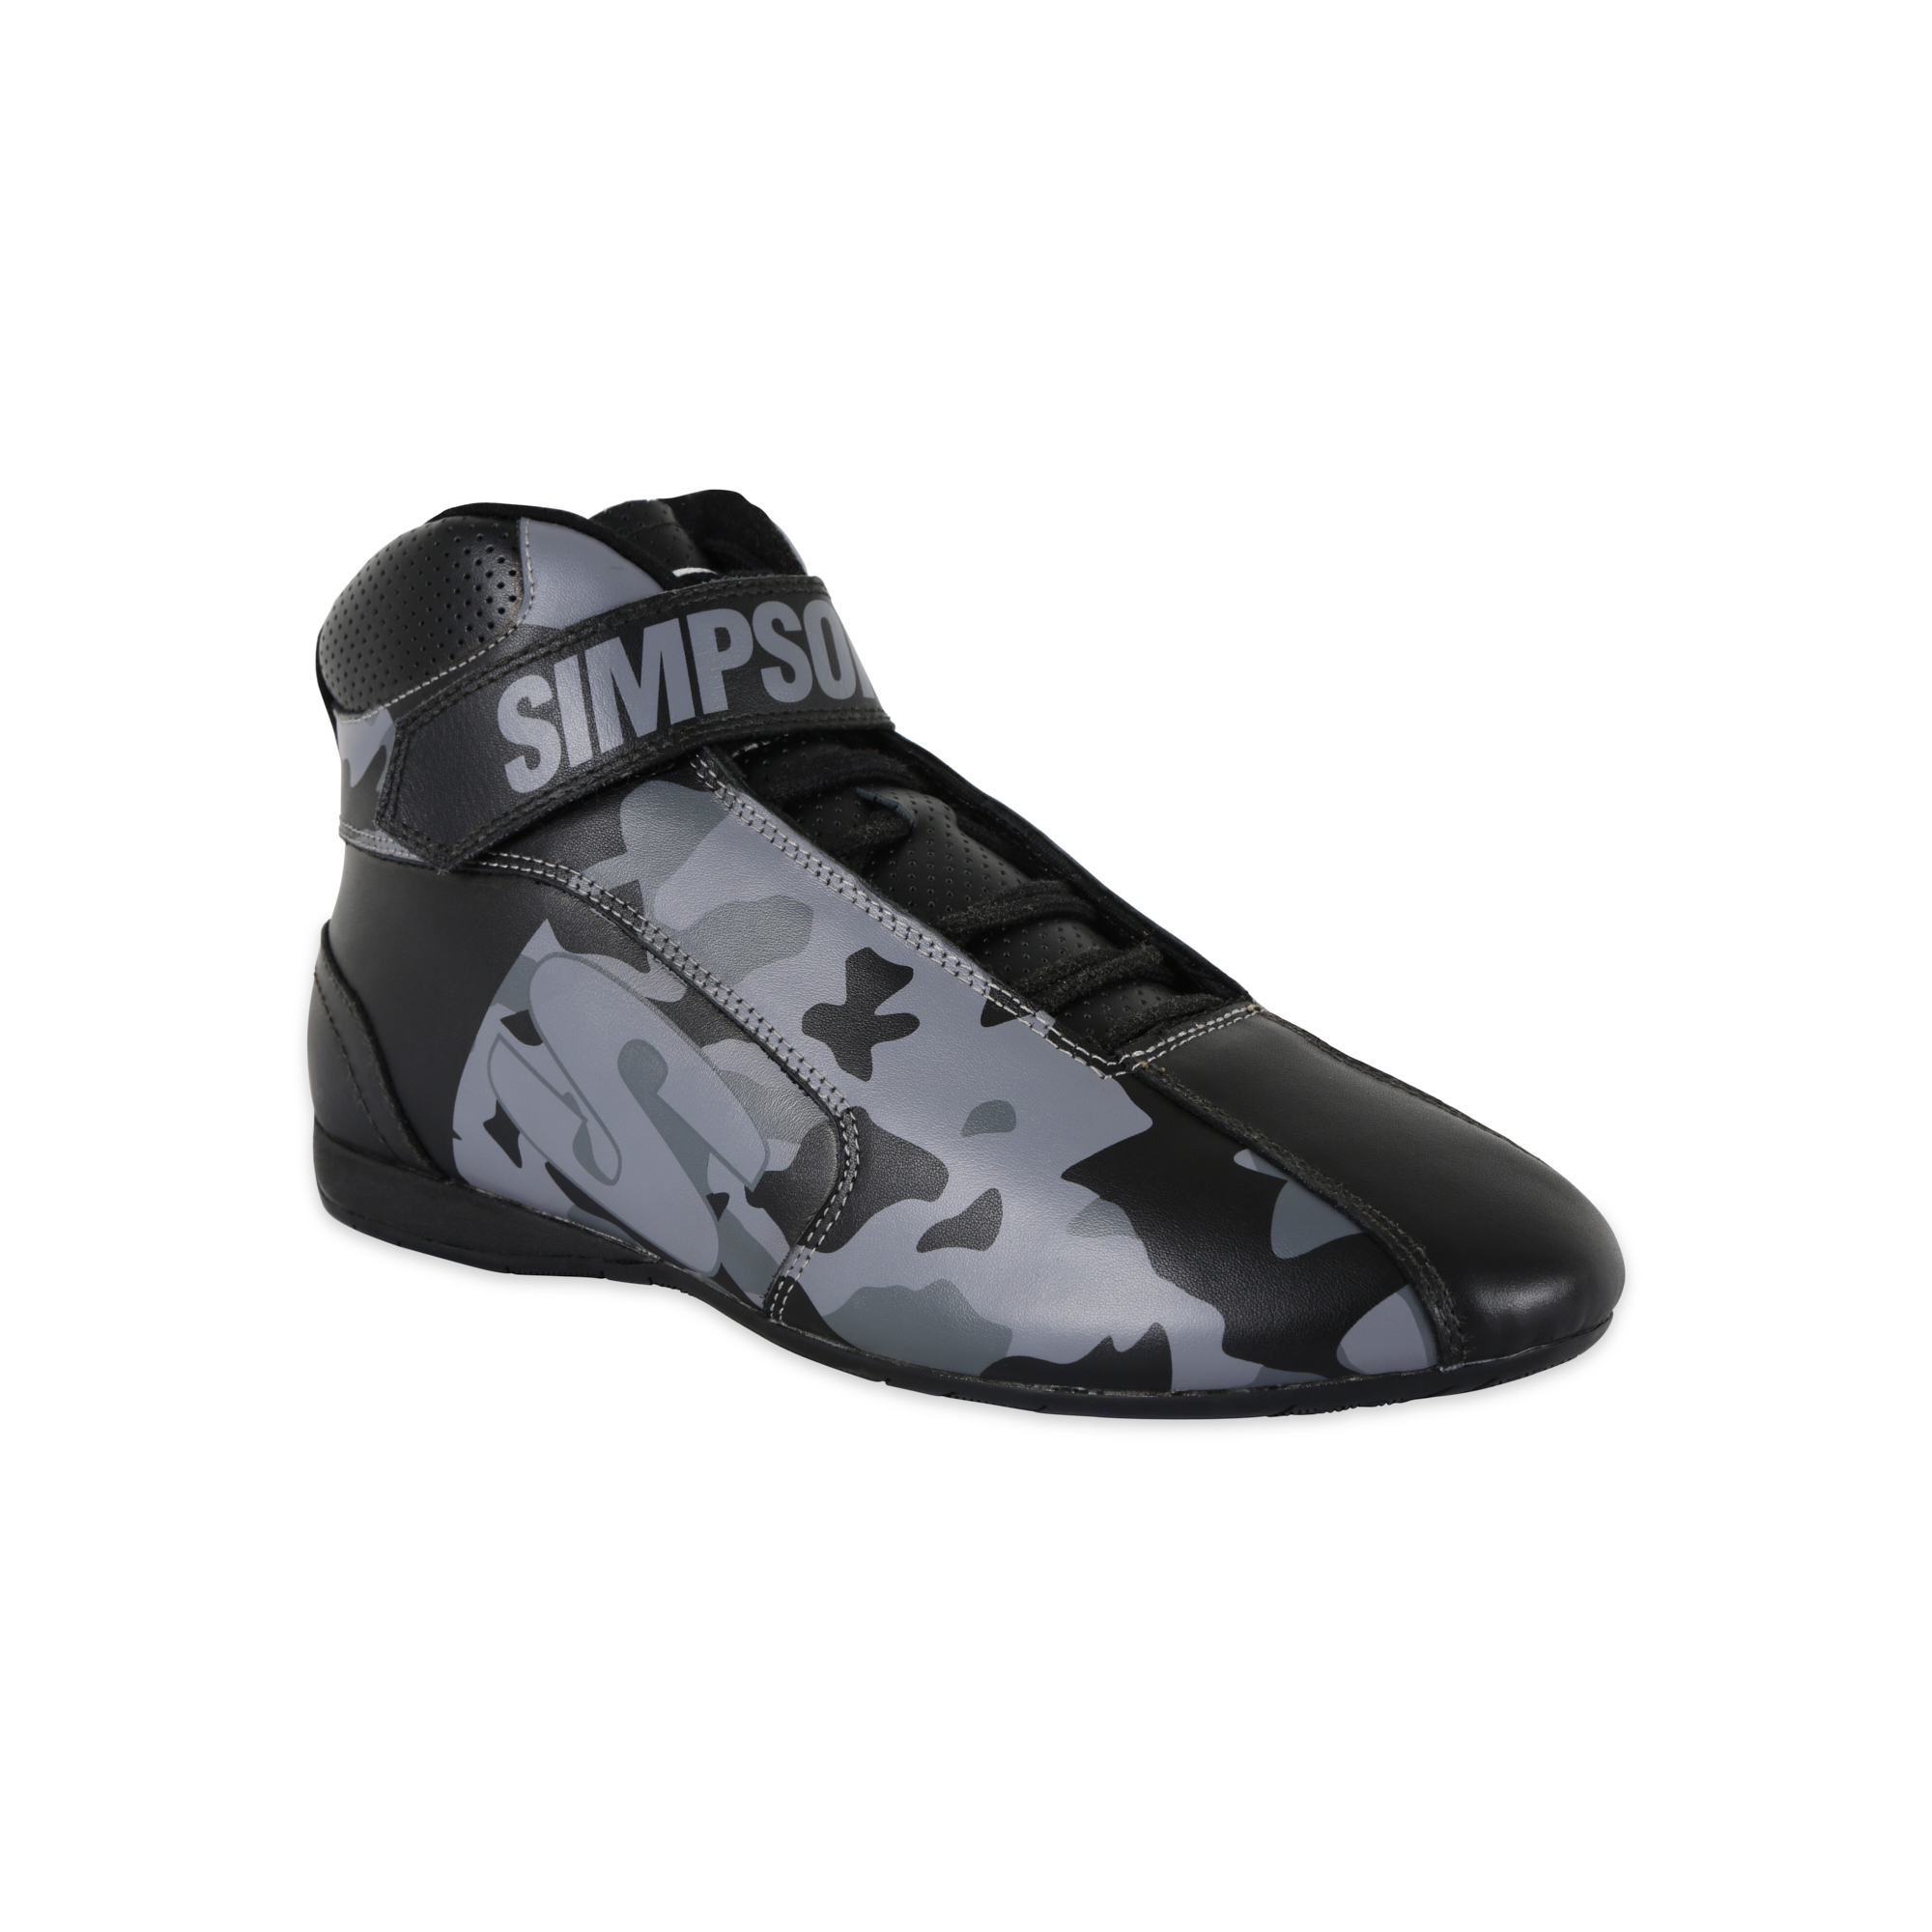 Simpson Safety DX2100K Shoe, DNA X2 Blackout, Mid-Top, SFI 3.3/5, Leather Outer, Nomex Inner, Black / Gray, Size 10, Pair